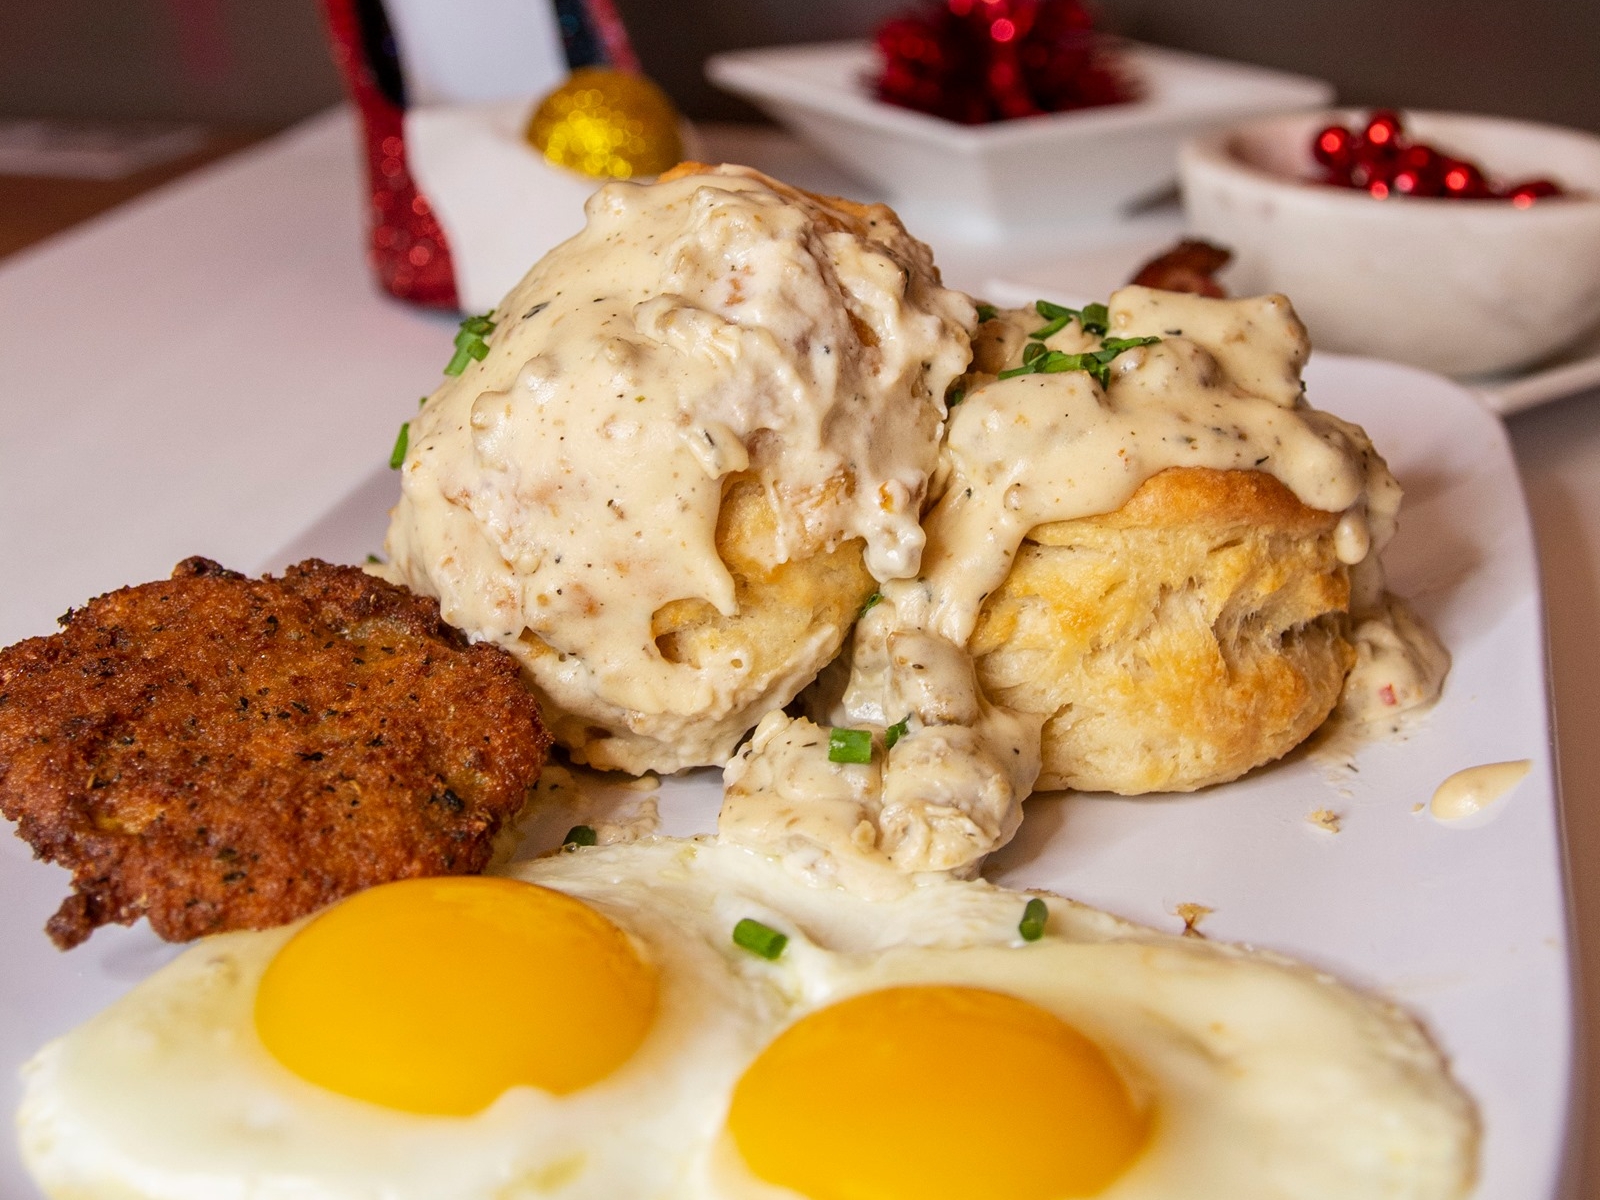 Ruby Sunshine biscuits and gravy